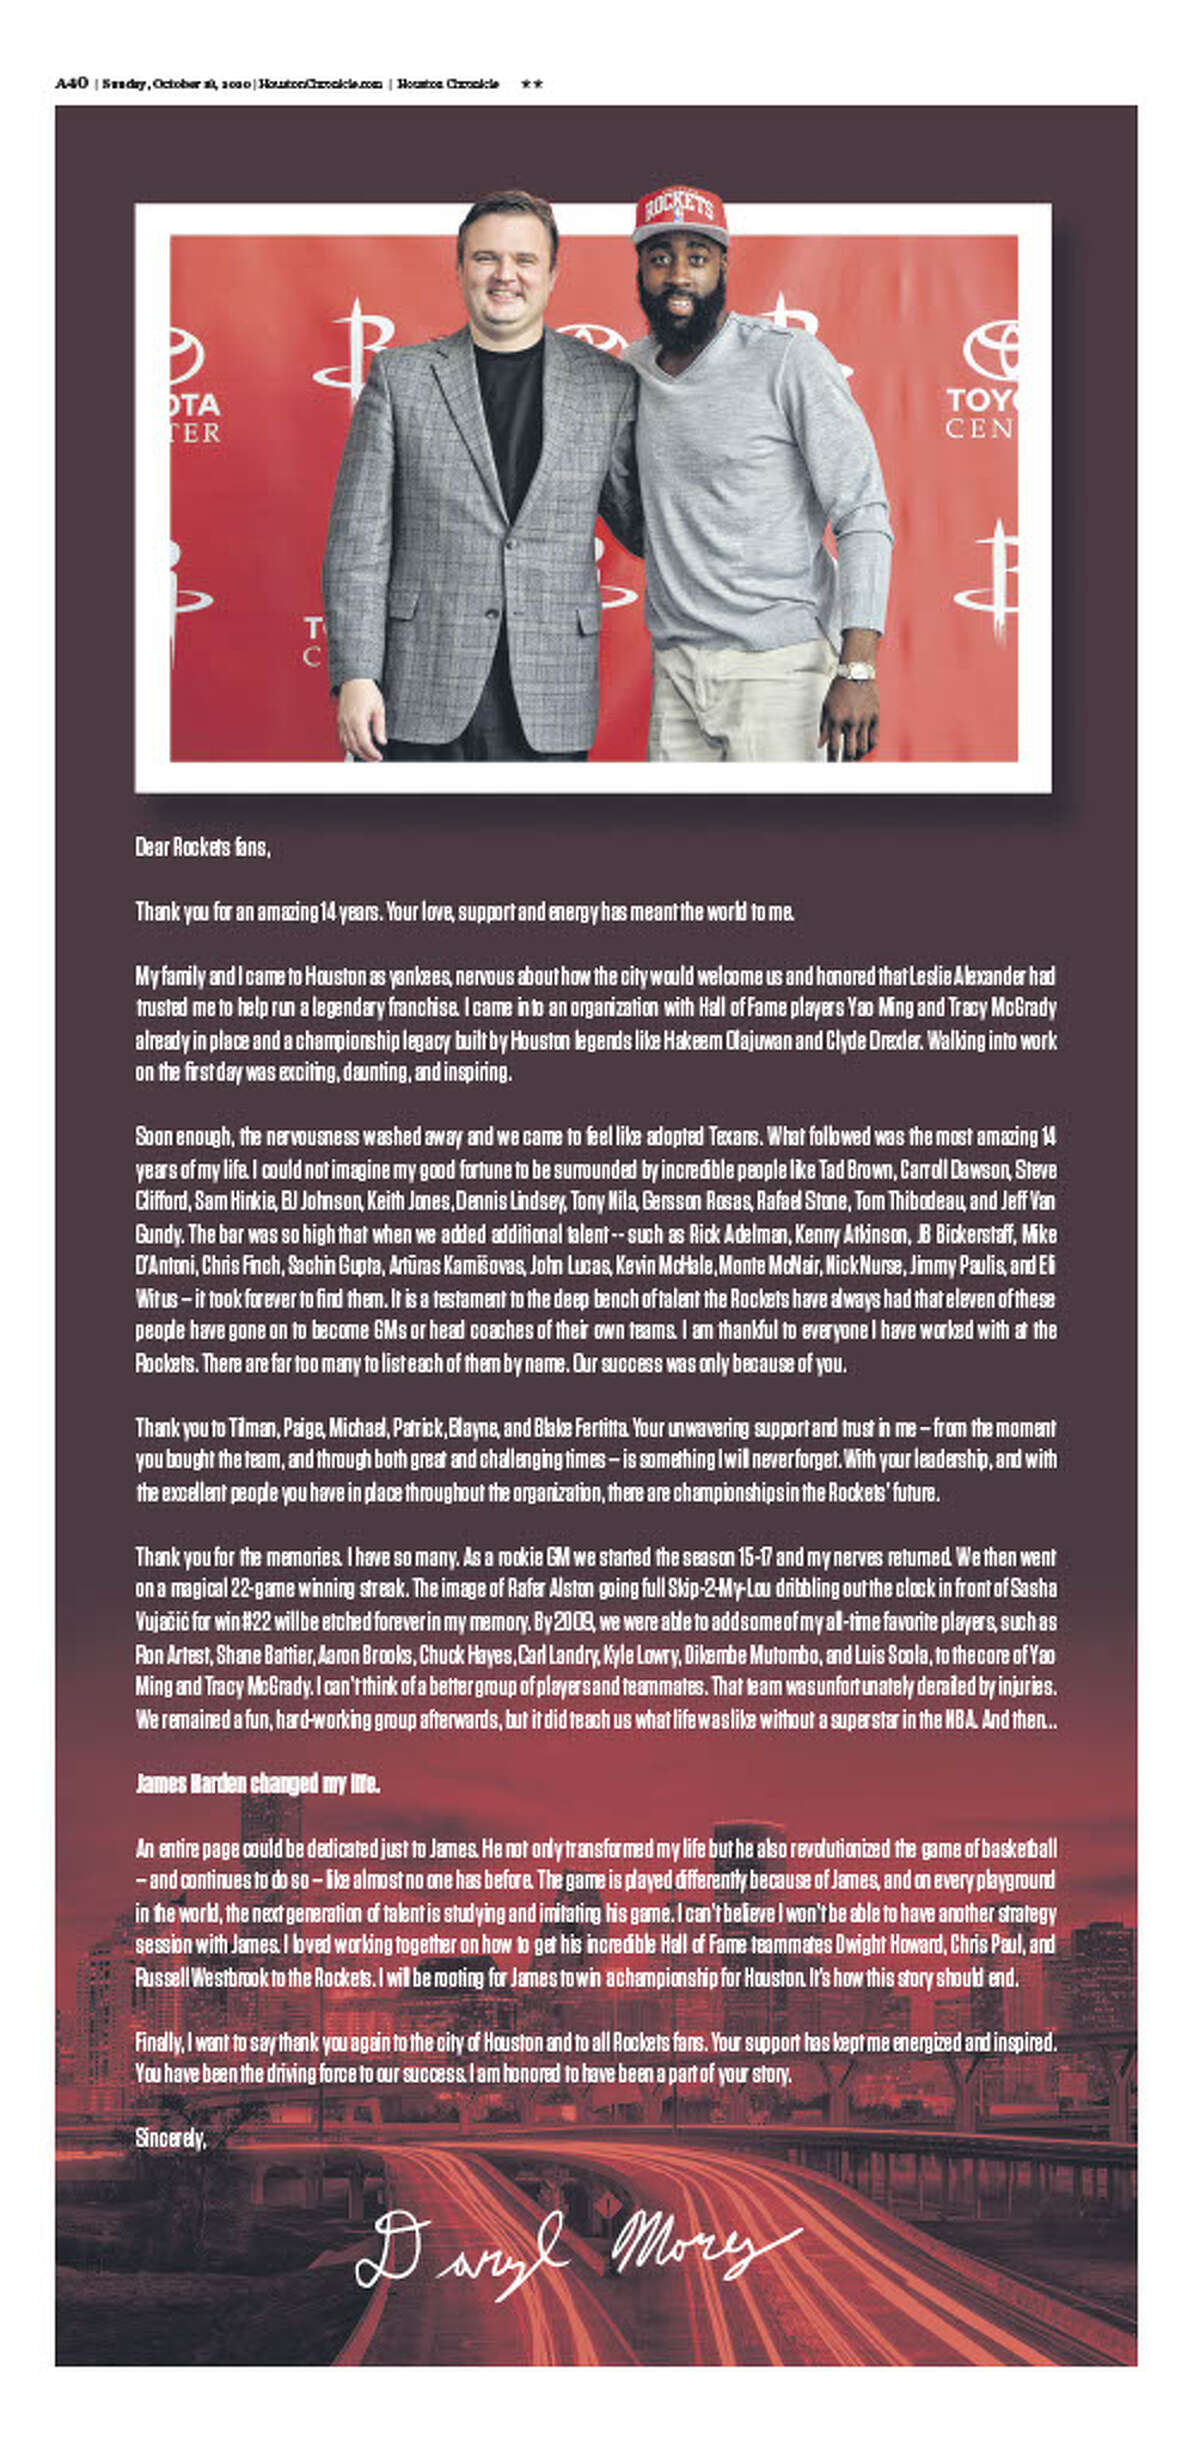 Daryl Morey took out a full-page ad in the Houston Chronicle on Sunday, Oct. 18, 2020, days after resigning as the Houston Rockets' general manager.